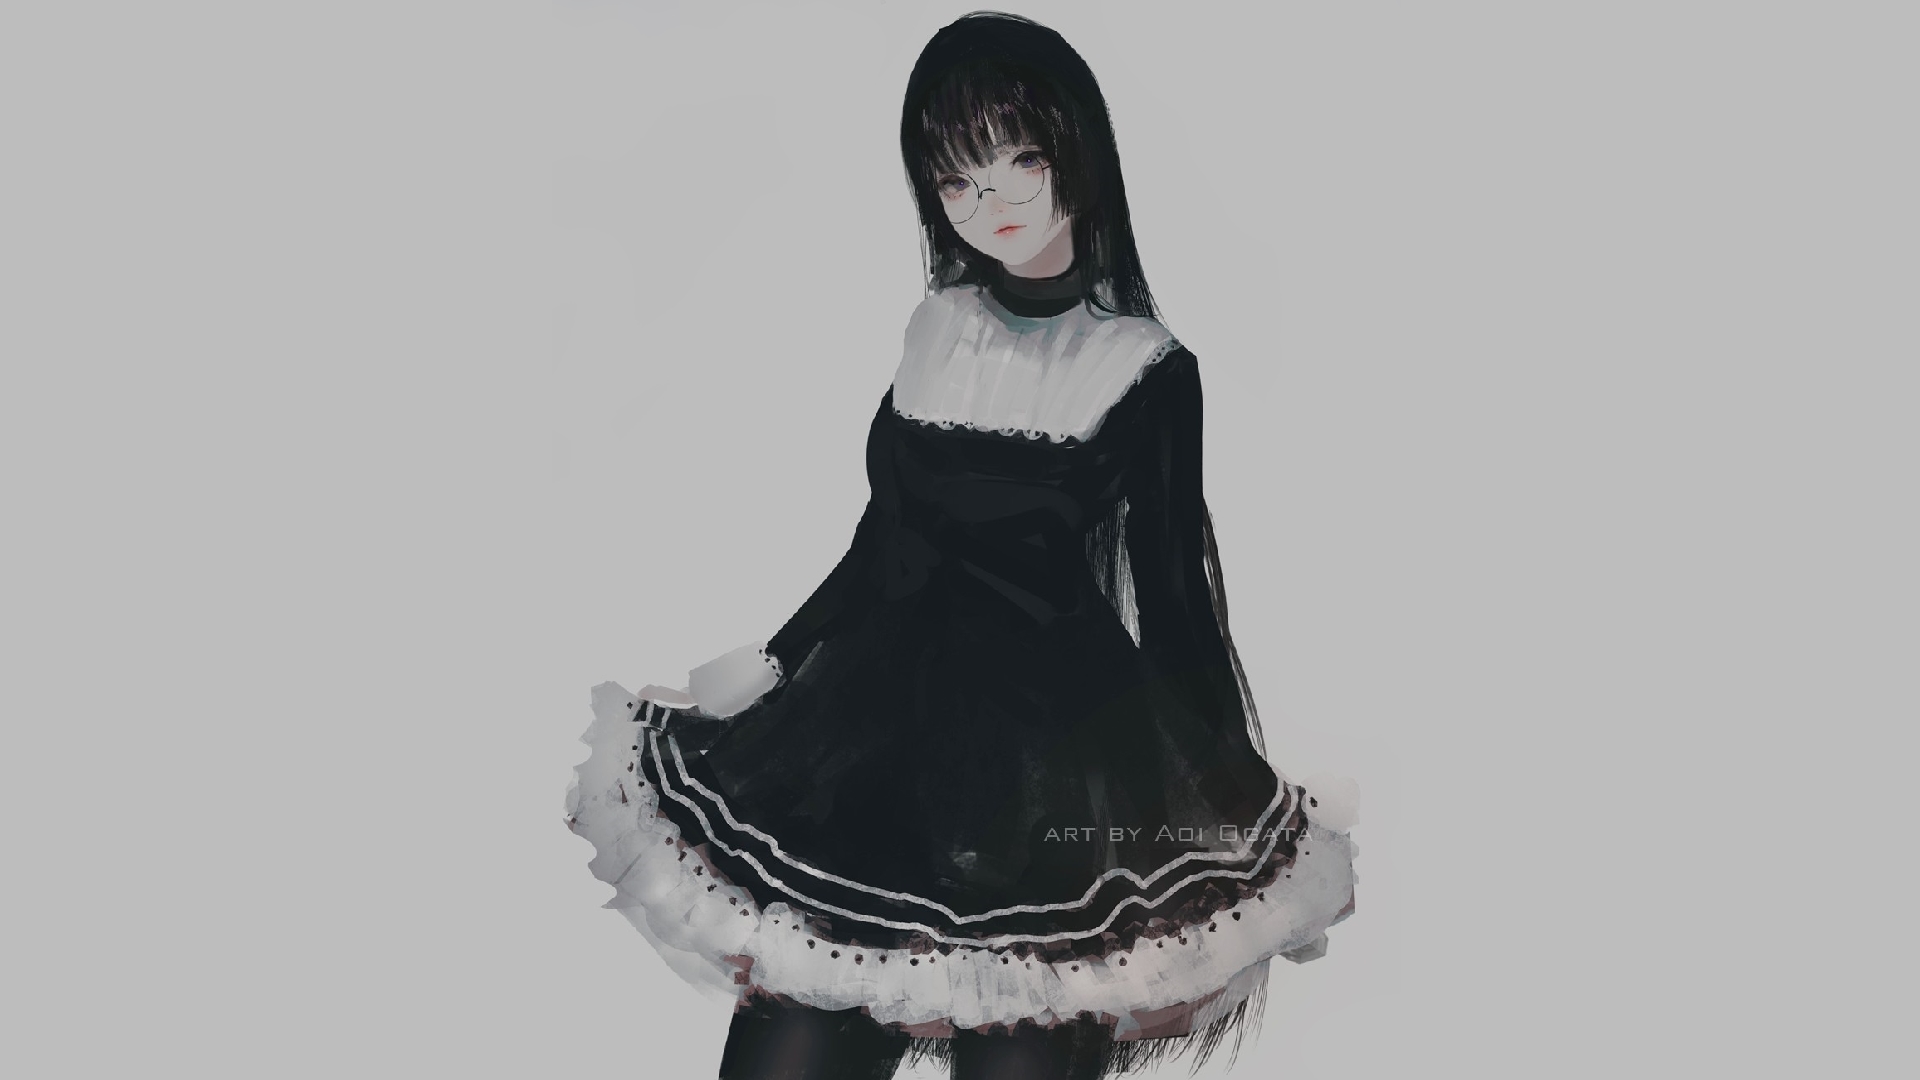 Anime 1920x1080 Aoi Ogata digital art artwork illustration simple background black clothing minimalism hate-chan maid outfit women with glasses looking at viewer black hair original characters